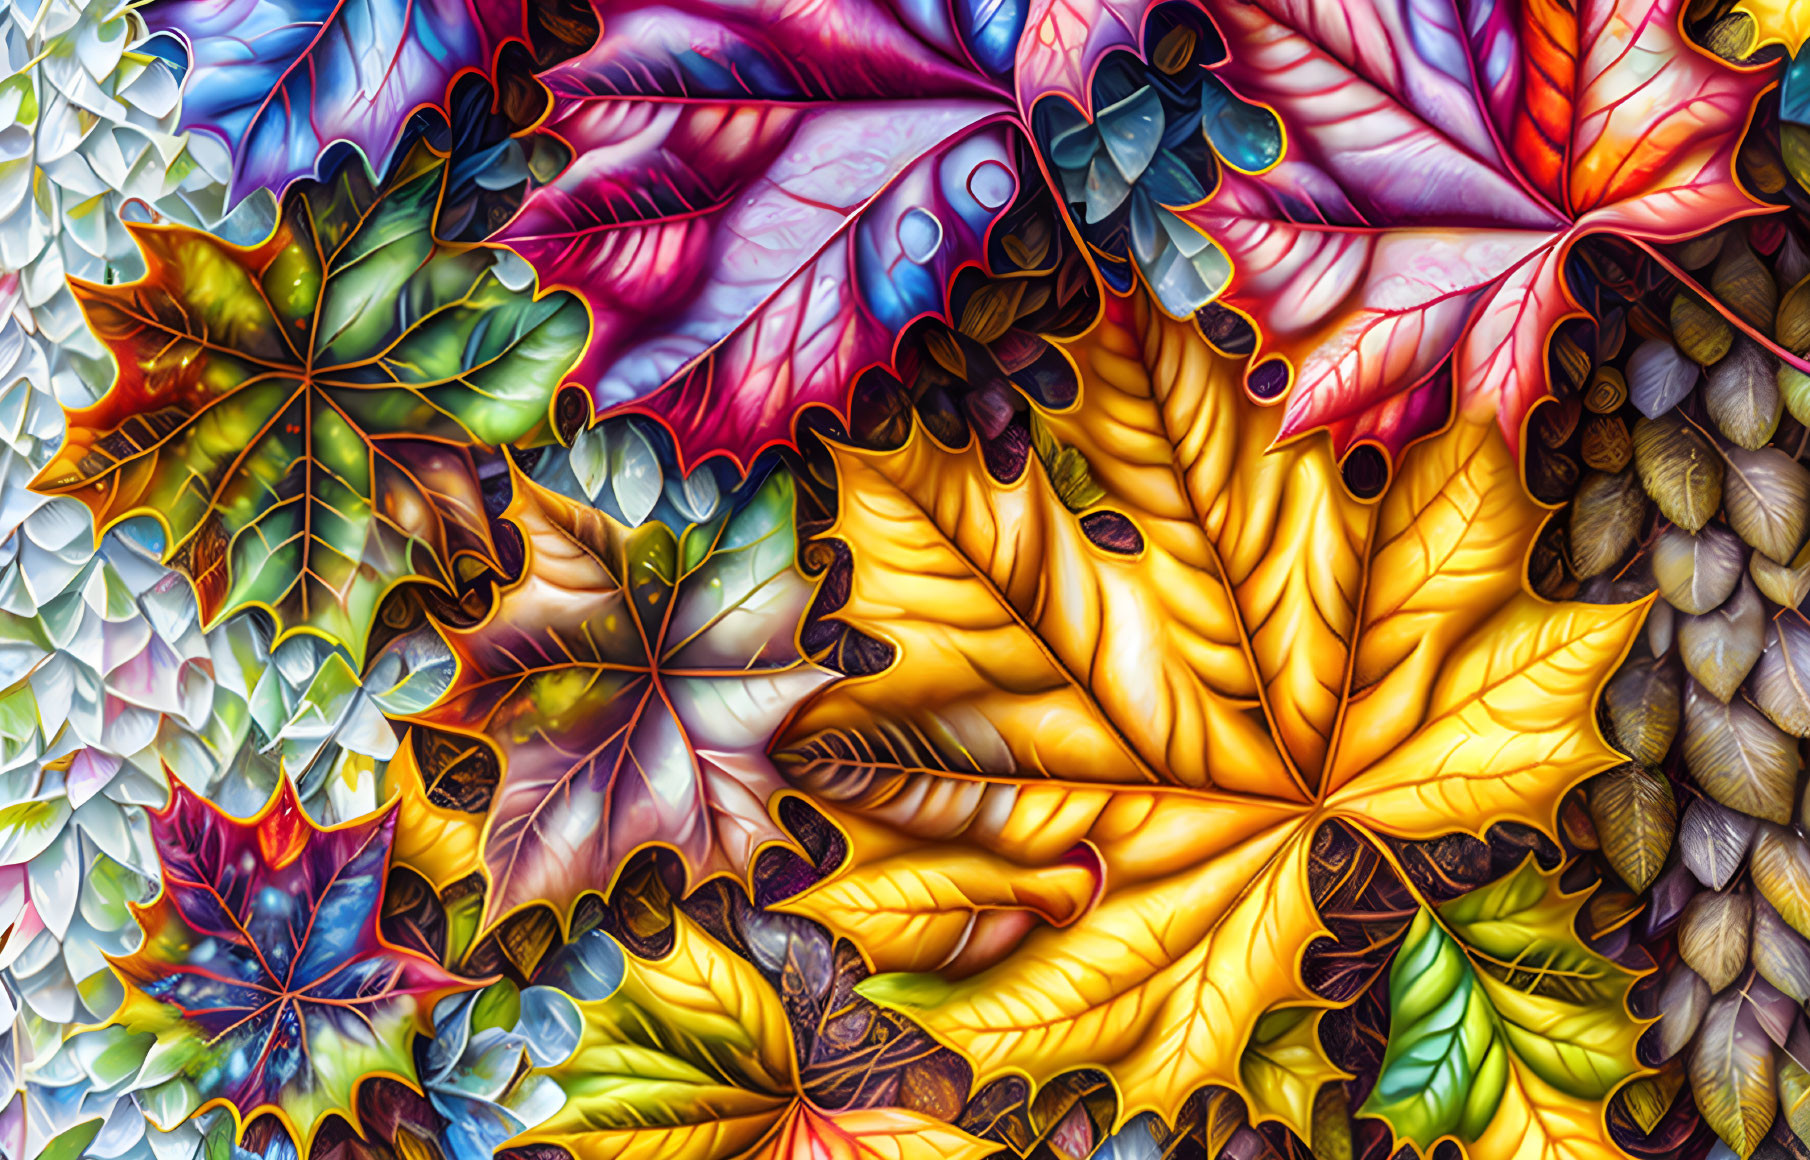 Colorful Autumn Leaves with Detailed Textures and Intricate Patterns